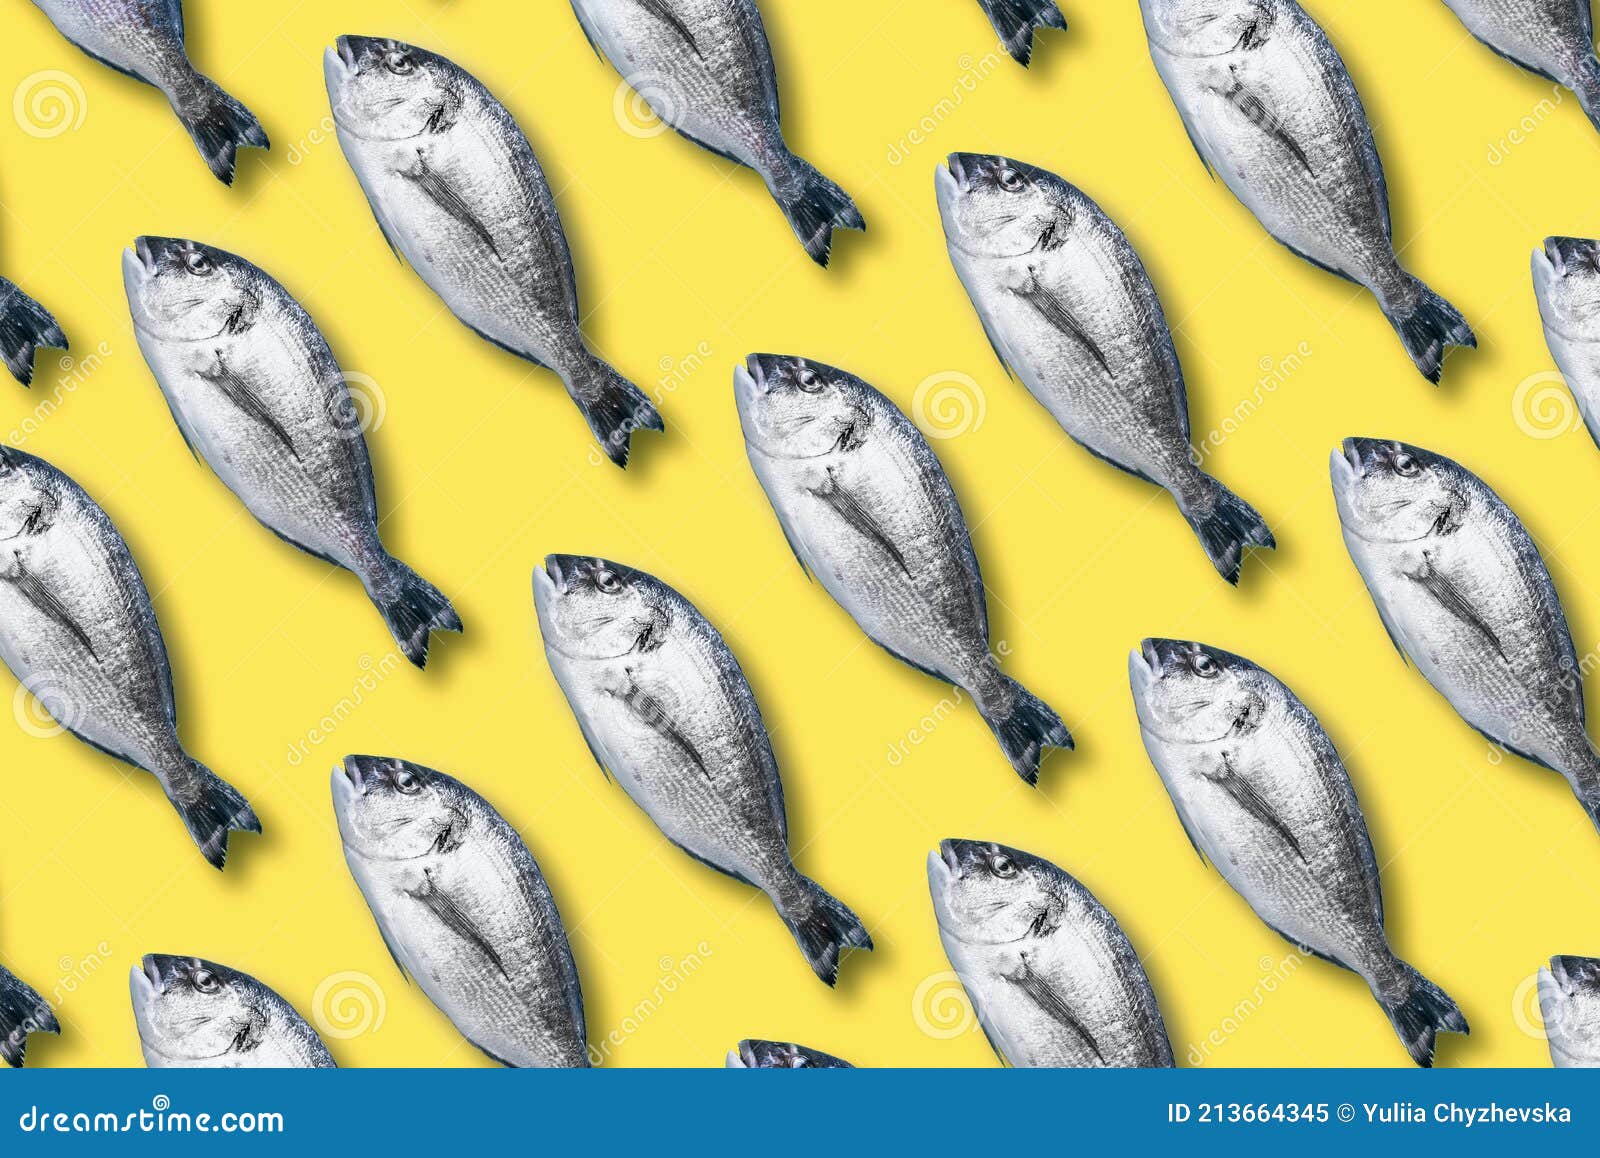 dorado fish pattern, food concept. demonstrating trendy color of the year 2021. illuminating yellow and ultimate gray